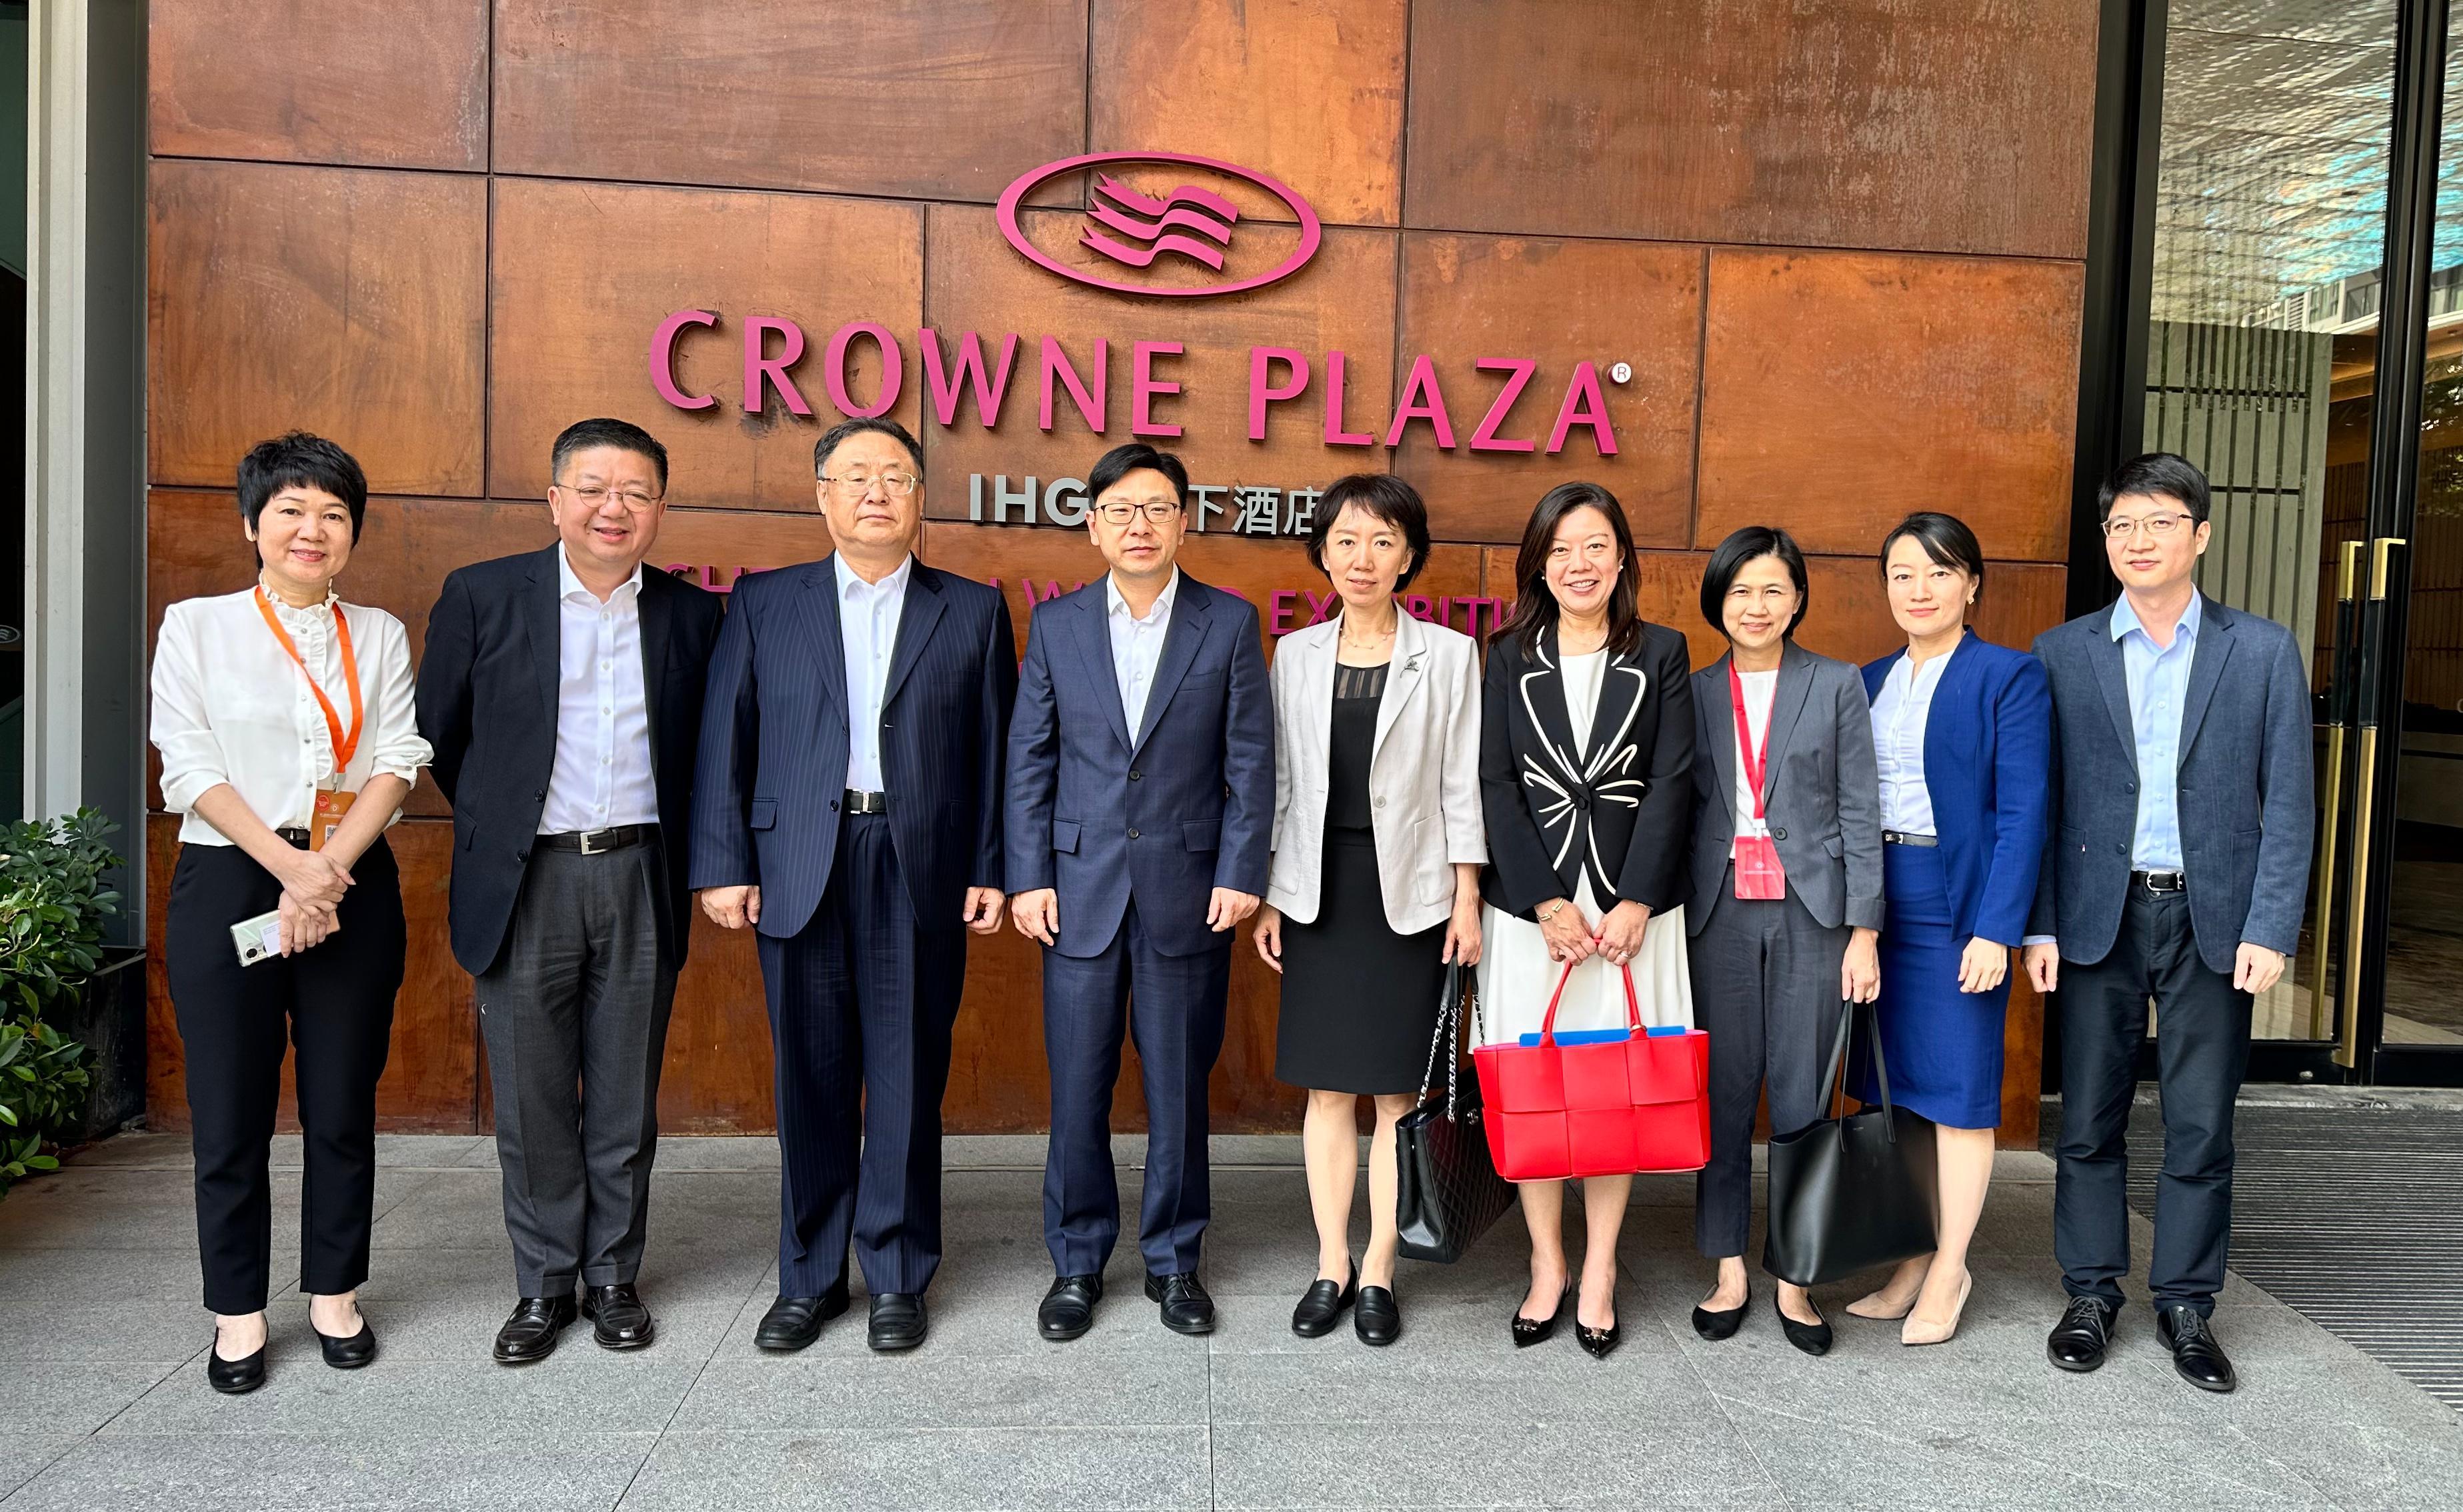 The Secretary for Labour and Welfare, Mr Chris Sun, today (November 22) led a Hong Kong Special Administrative Region (HKSAR) delegation to attend the 2nd National Conference on the Development of Human Resources Services in Shenzhen. Photo shows Mr Sun (fourth left), accompanied by the Commissioner for Labour, Ms May Chan (sixth left), and the Director of Hong Kong Talent Engage, Mr Anthony Lau (second left), and the Chairman of China International Intellectech Group Co Ltd, Mr Bu Yulong (third left), before a lunch meeting at noon. The Company is one of the enterprises approved by the relevant competent commerce department of the Mainland to engage in labour service co-operation with the HKSAR. They exchanged views on protecting imported workers' employment rights and benefits.